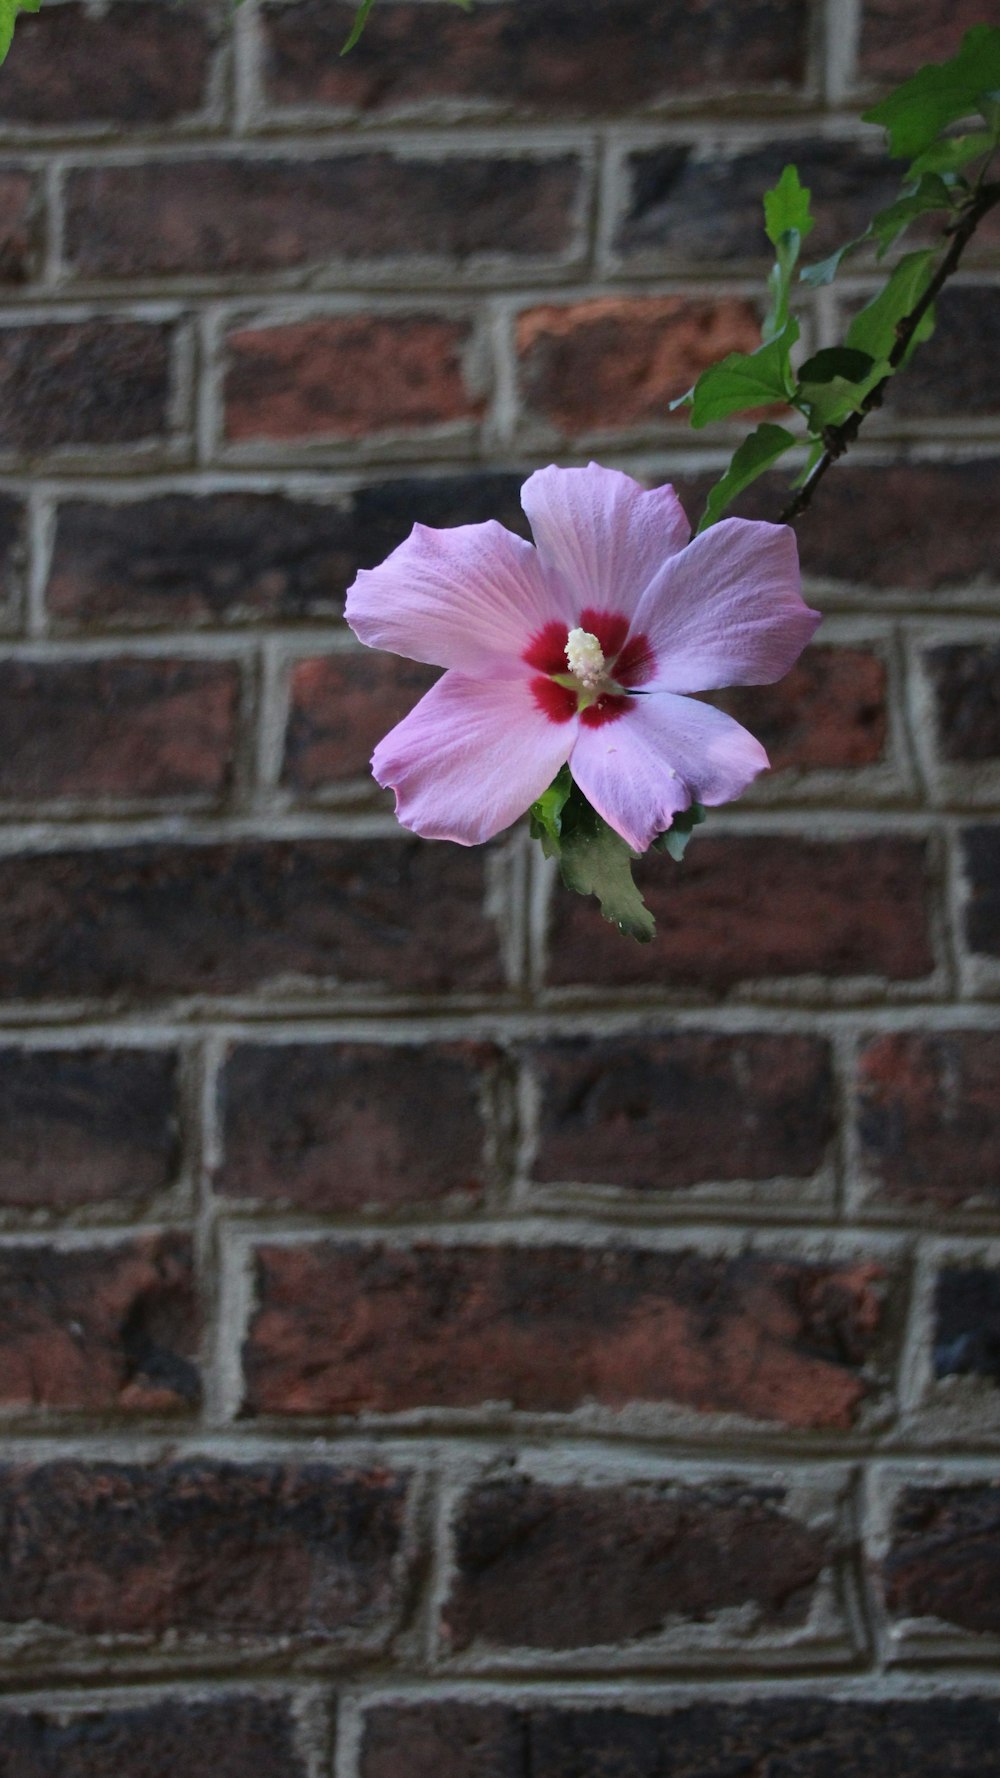 a pink flower on a branch in front of a brick wall